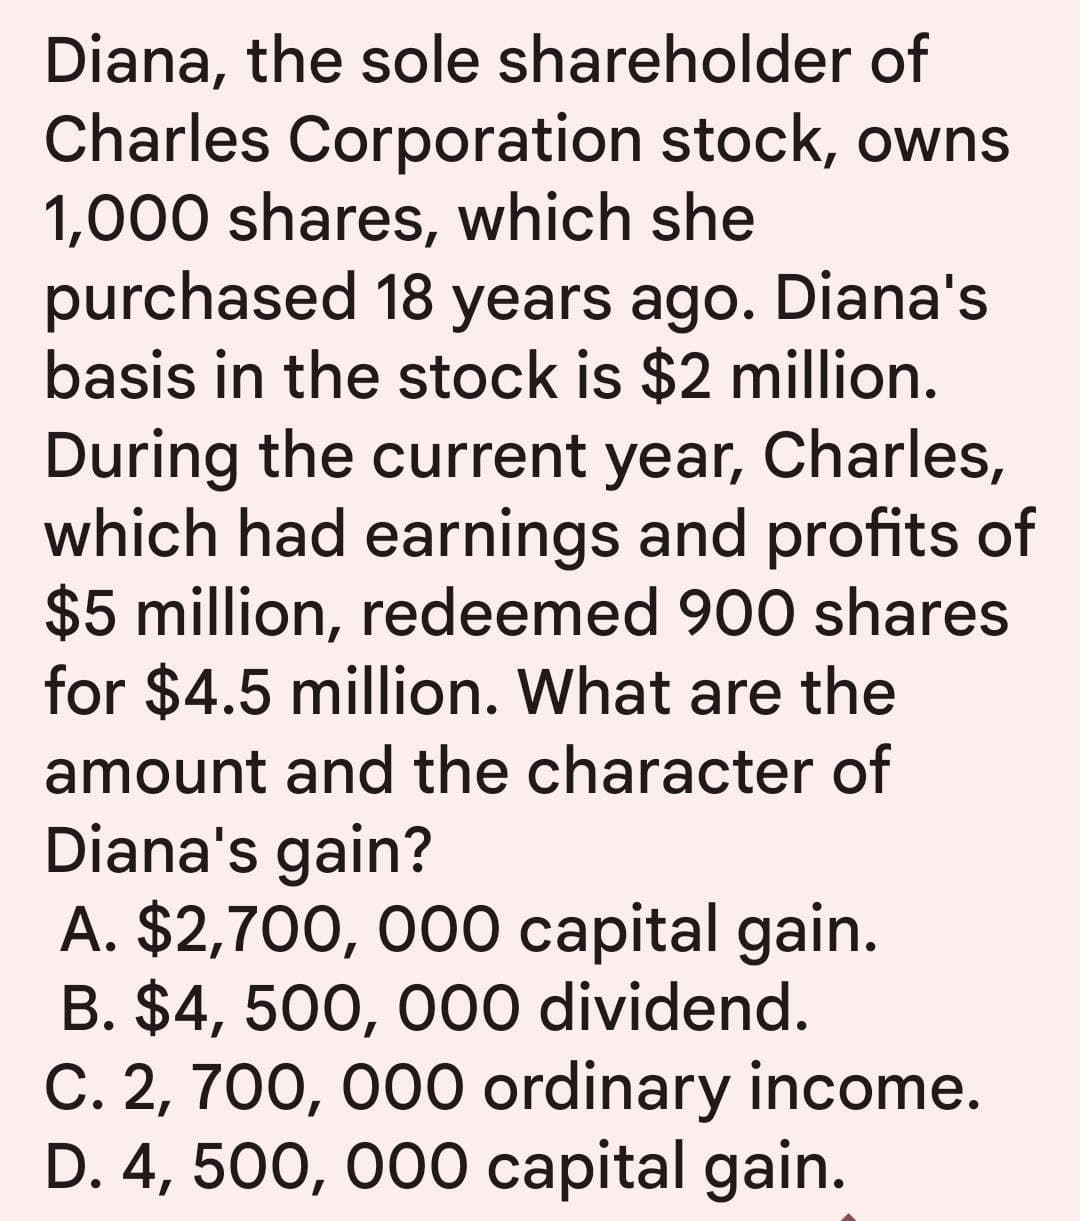 Diana, the sole shareholder of
Charles Corporation stock, owns
1,000 shares, which she
purchased 18 years ago. Diana's
basis in the stock is $2 million.
During the current year, Charles,
which had earnings and profits of
$5 million, redeemed 900 shares
for $4.5 million. What are the
amount and the character of
Diana's gain?
A. $2,700, 000 capital gain.
B. $4,500,000 dividend.
C. 2, 700, 000 ordinary income.
D. 4,500,000 capital gain.